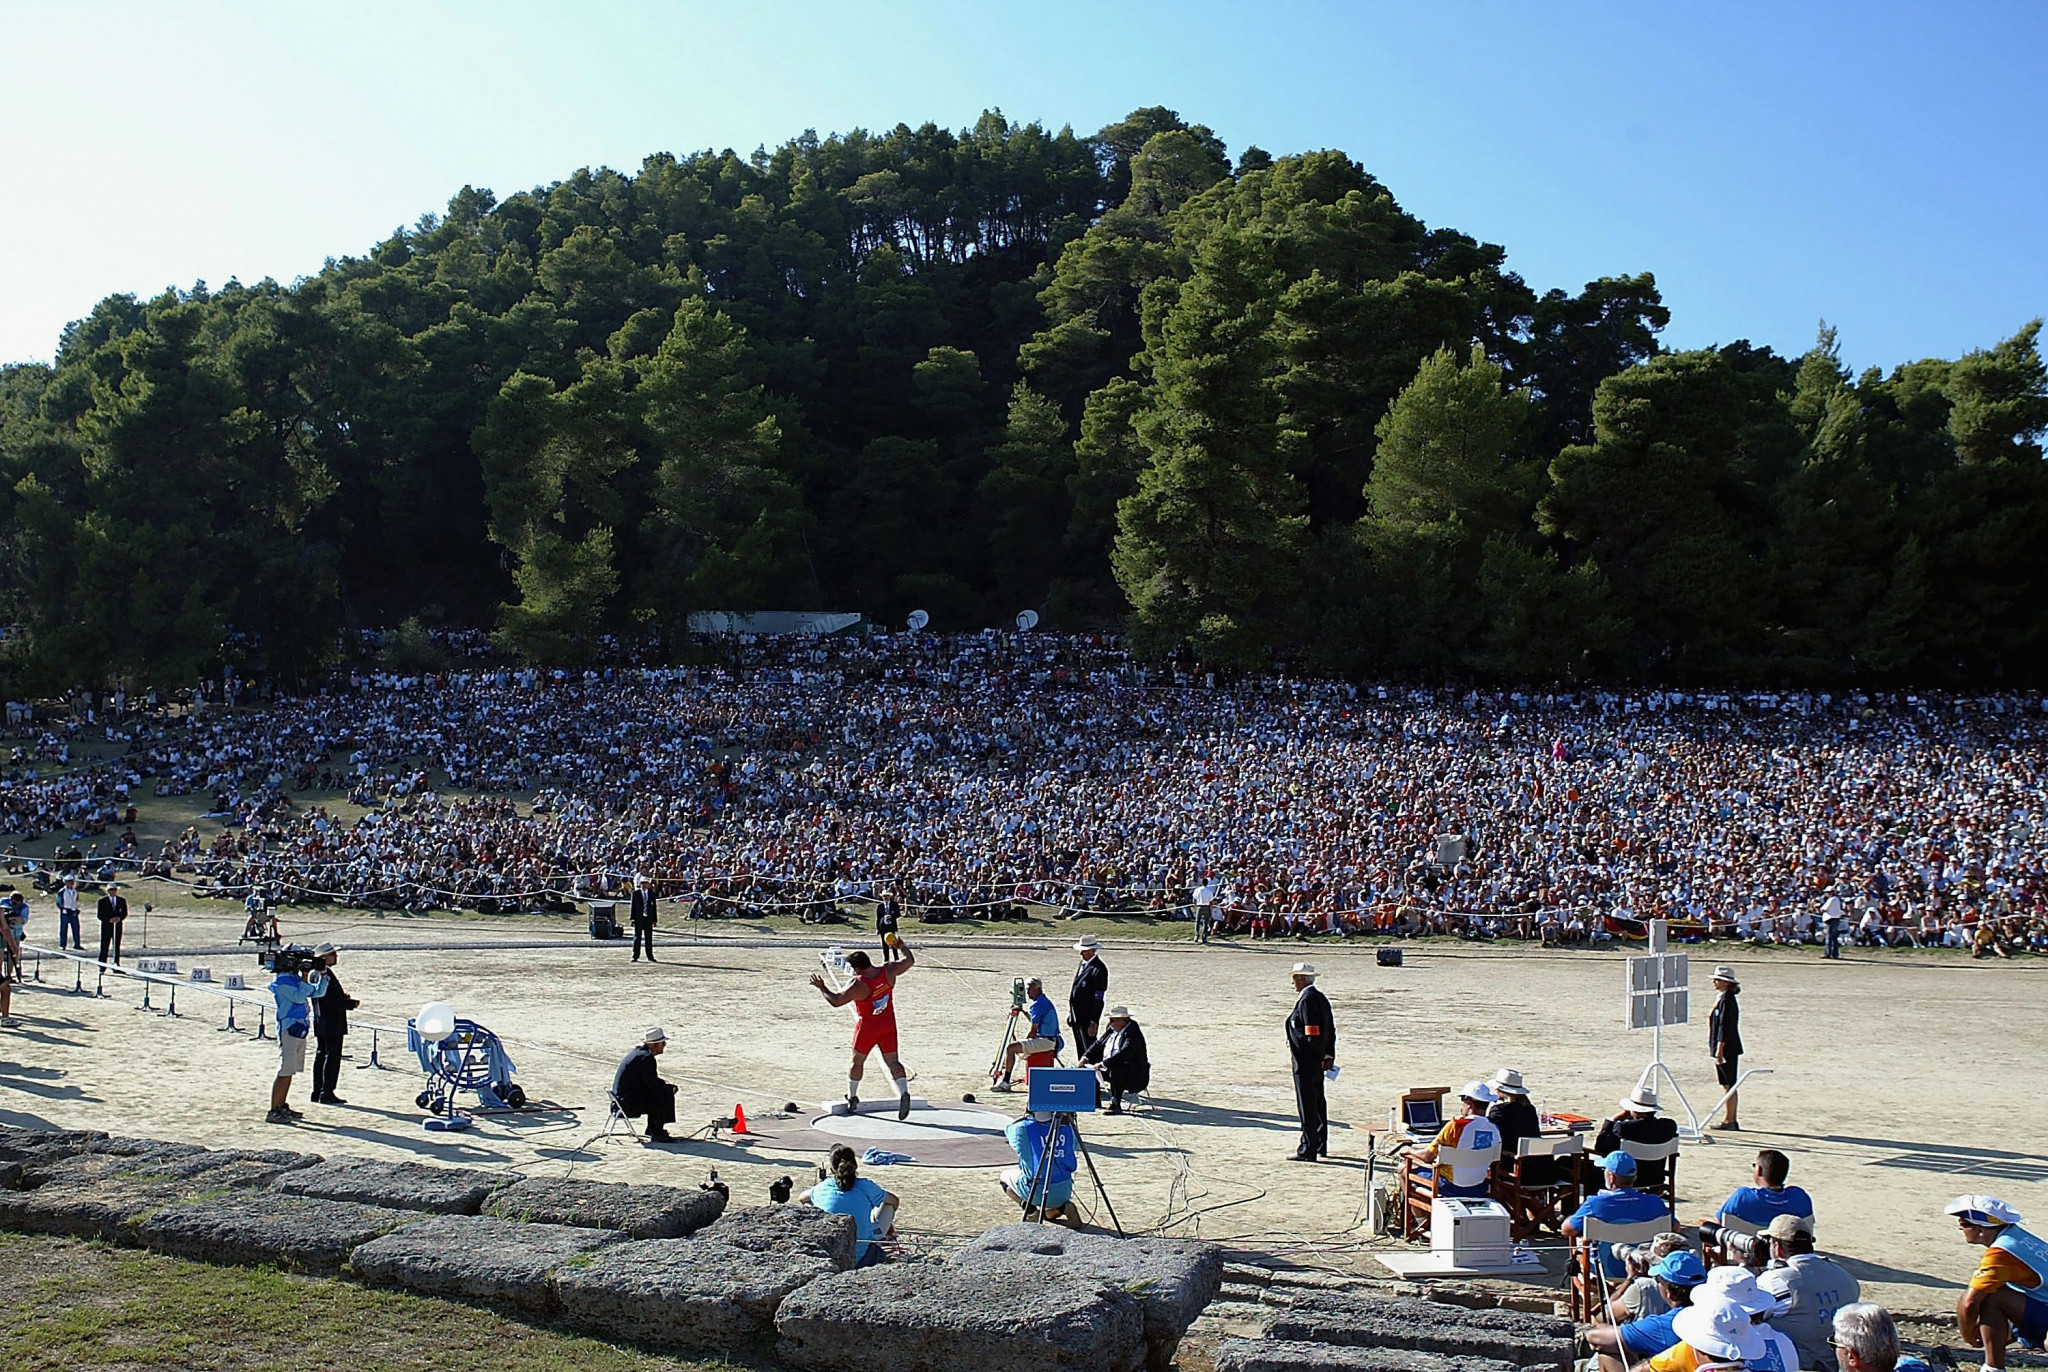 Athens 2004 Olympic organisers staged the shot put in Olympia where the Games of antiquity had taken place ©Getty Images